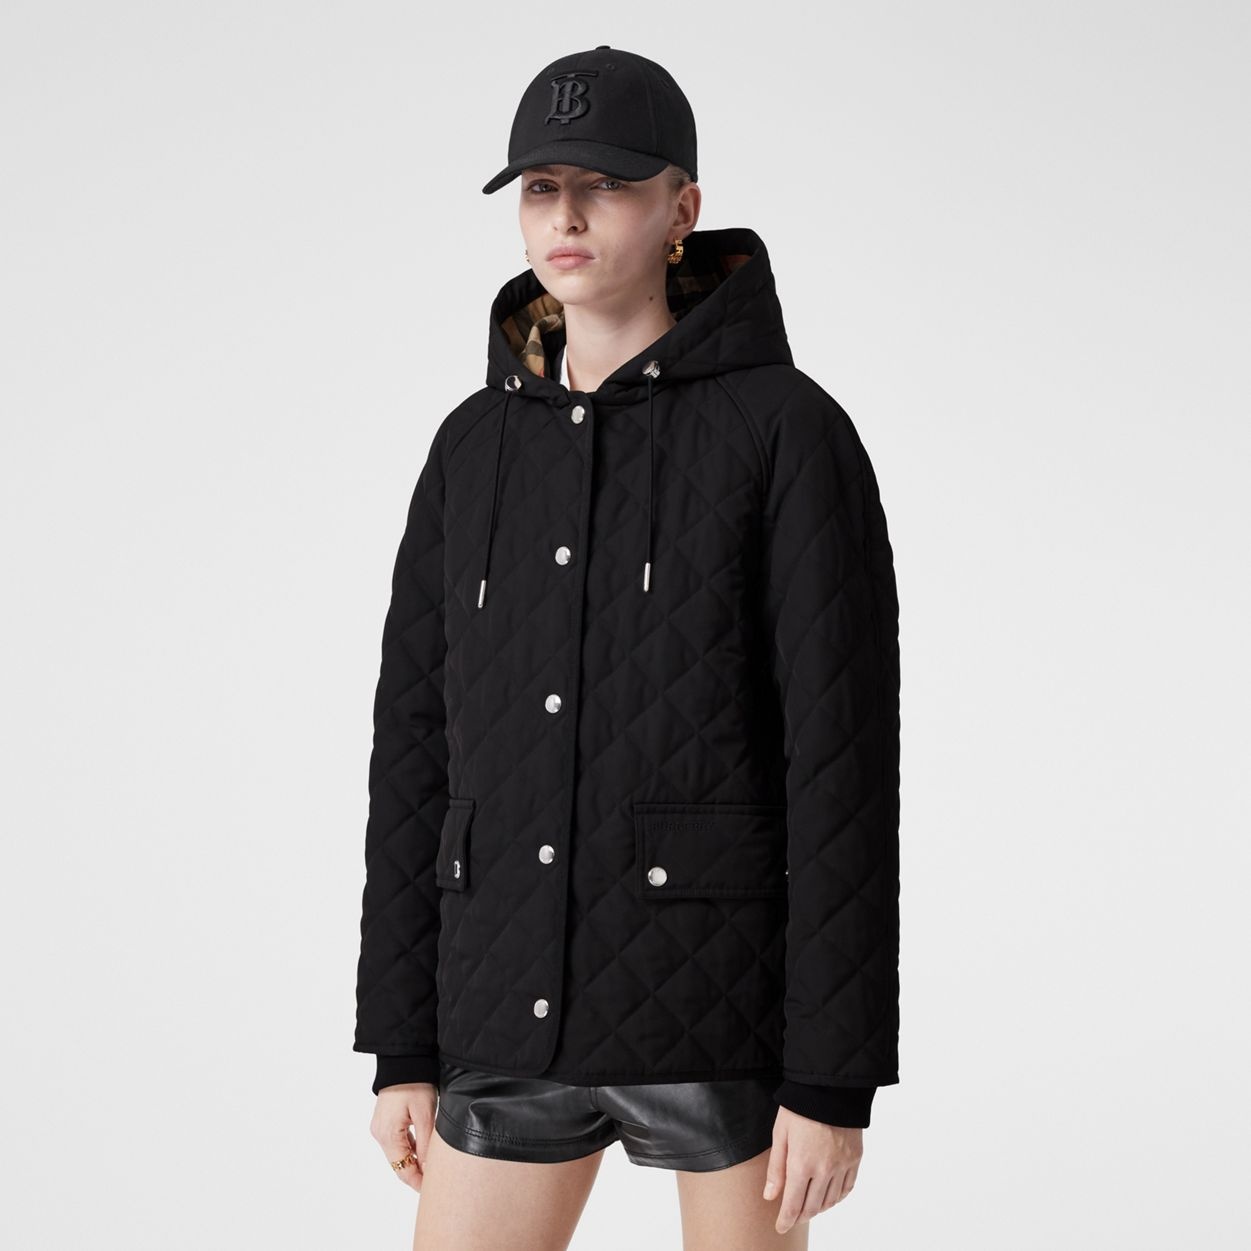 Burberry diamond-quilted hooded jackdet - Black